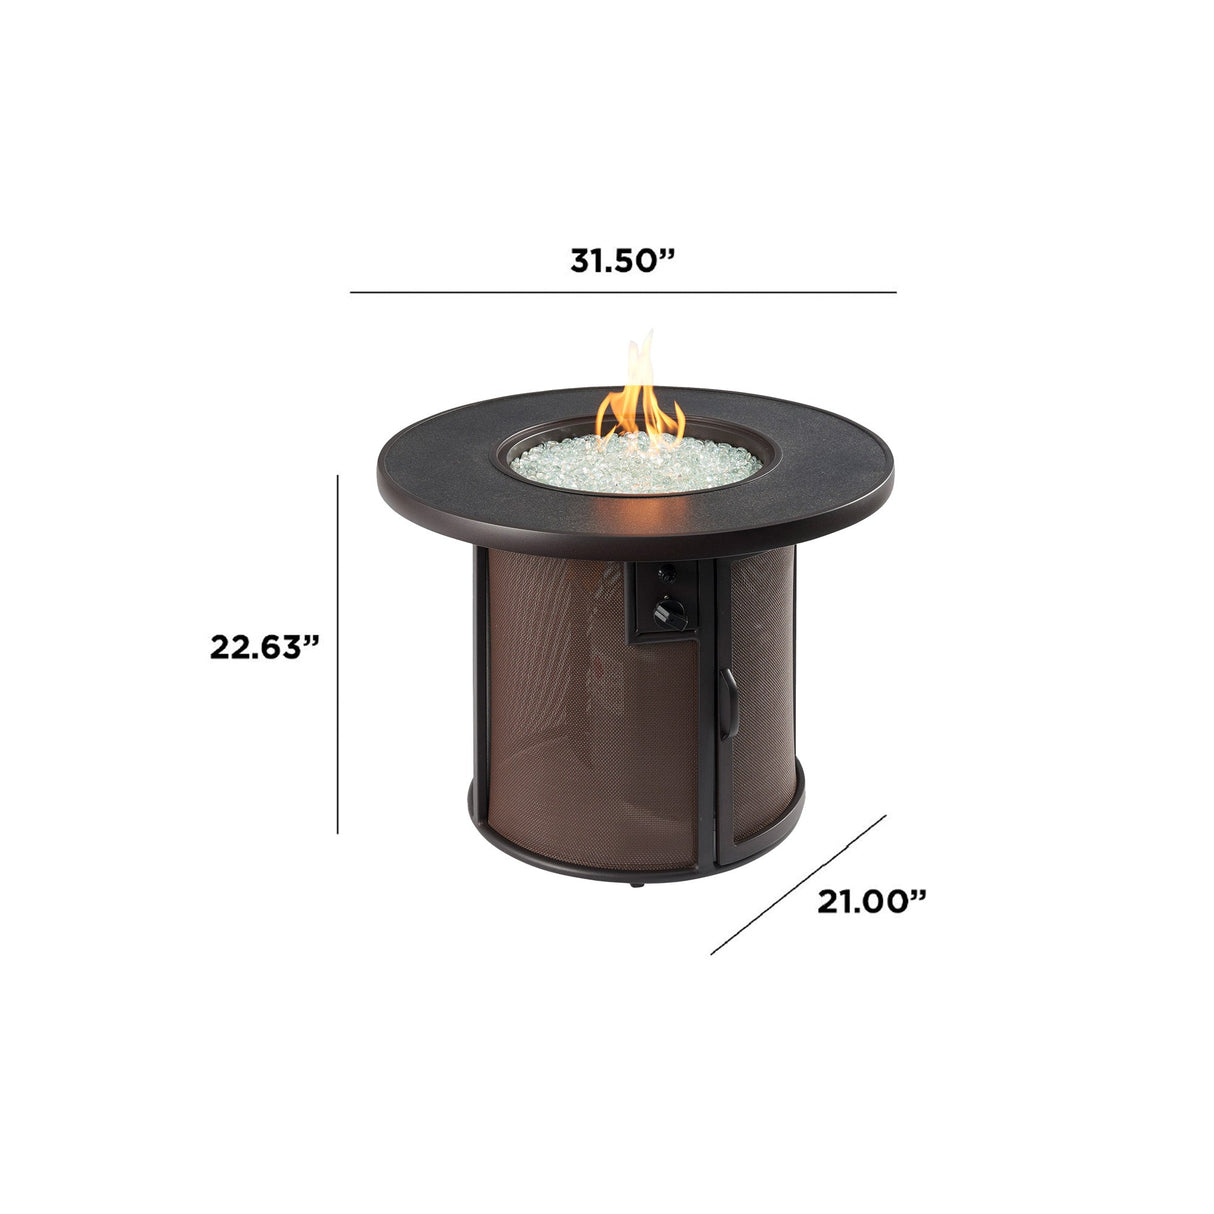 Dimensions overlaid on a Brown Stonefire Round Gas Fire Pit Table